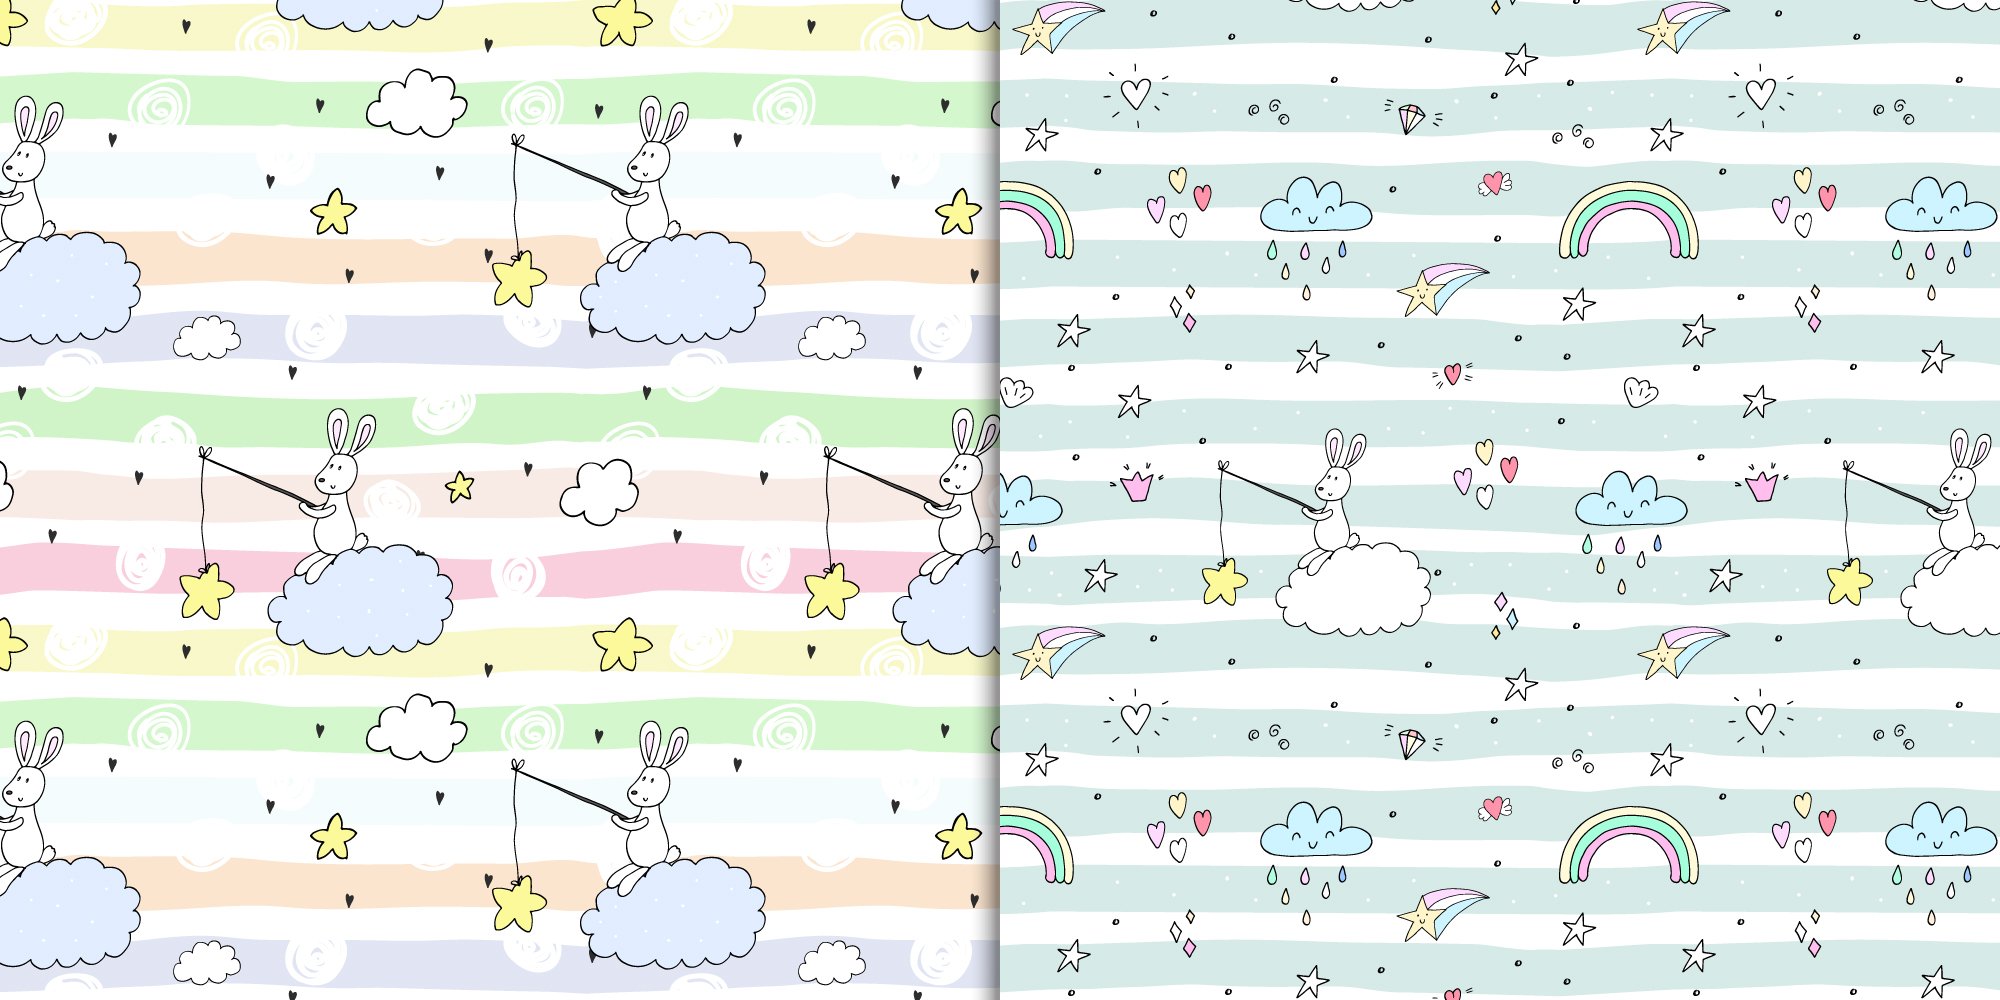 Cute rabbits patterns colection!.